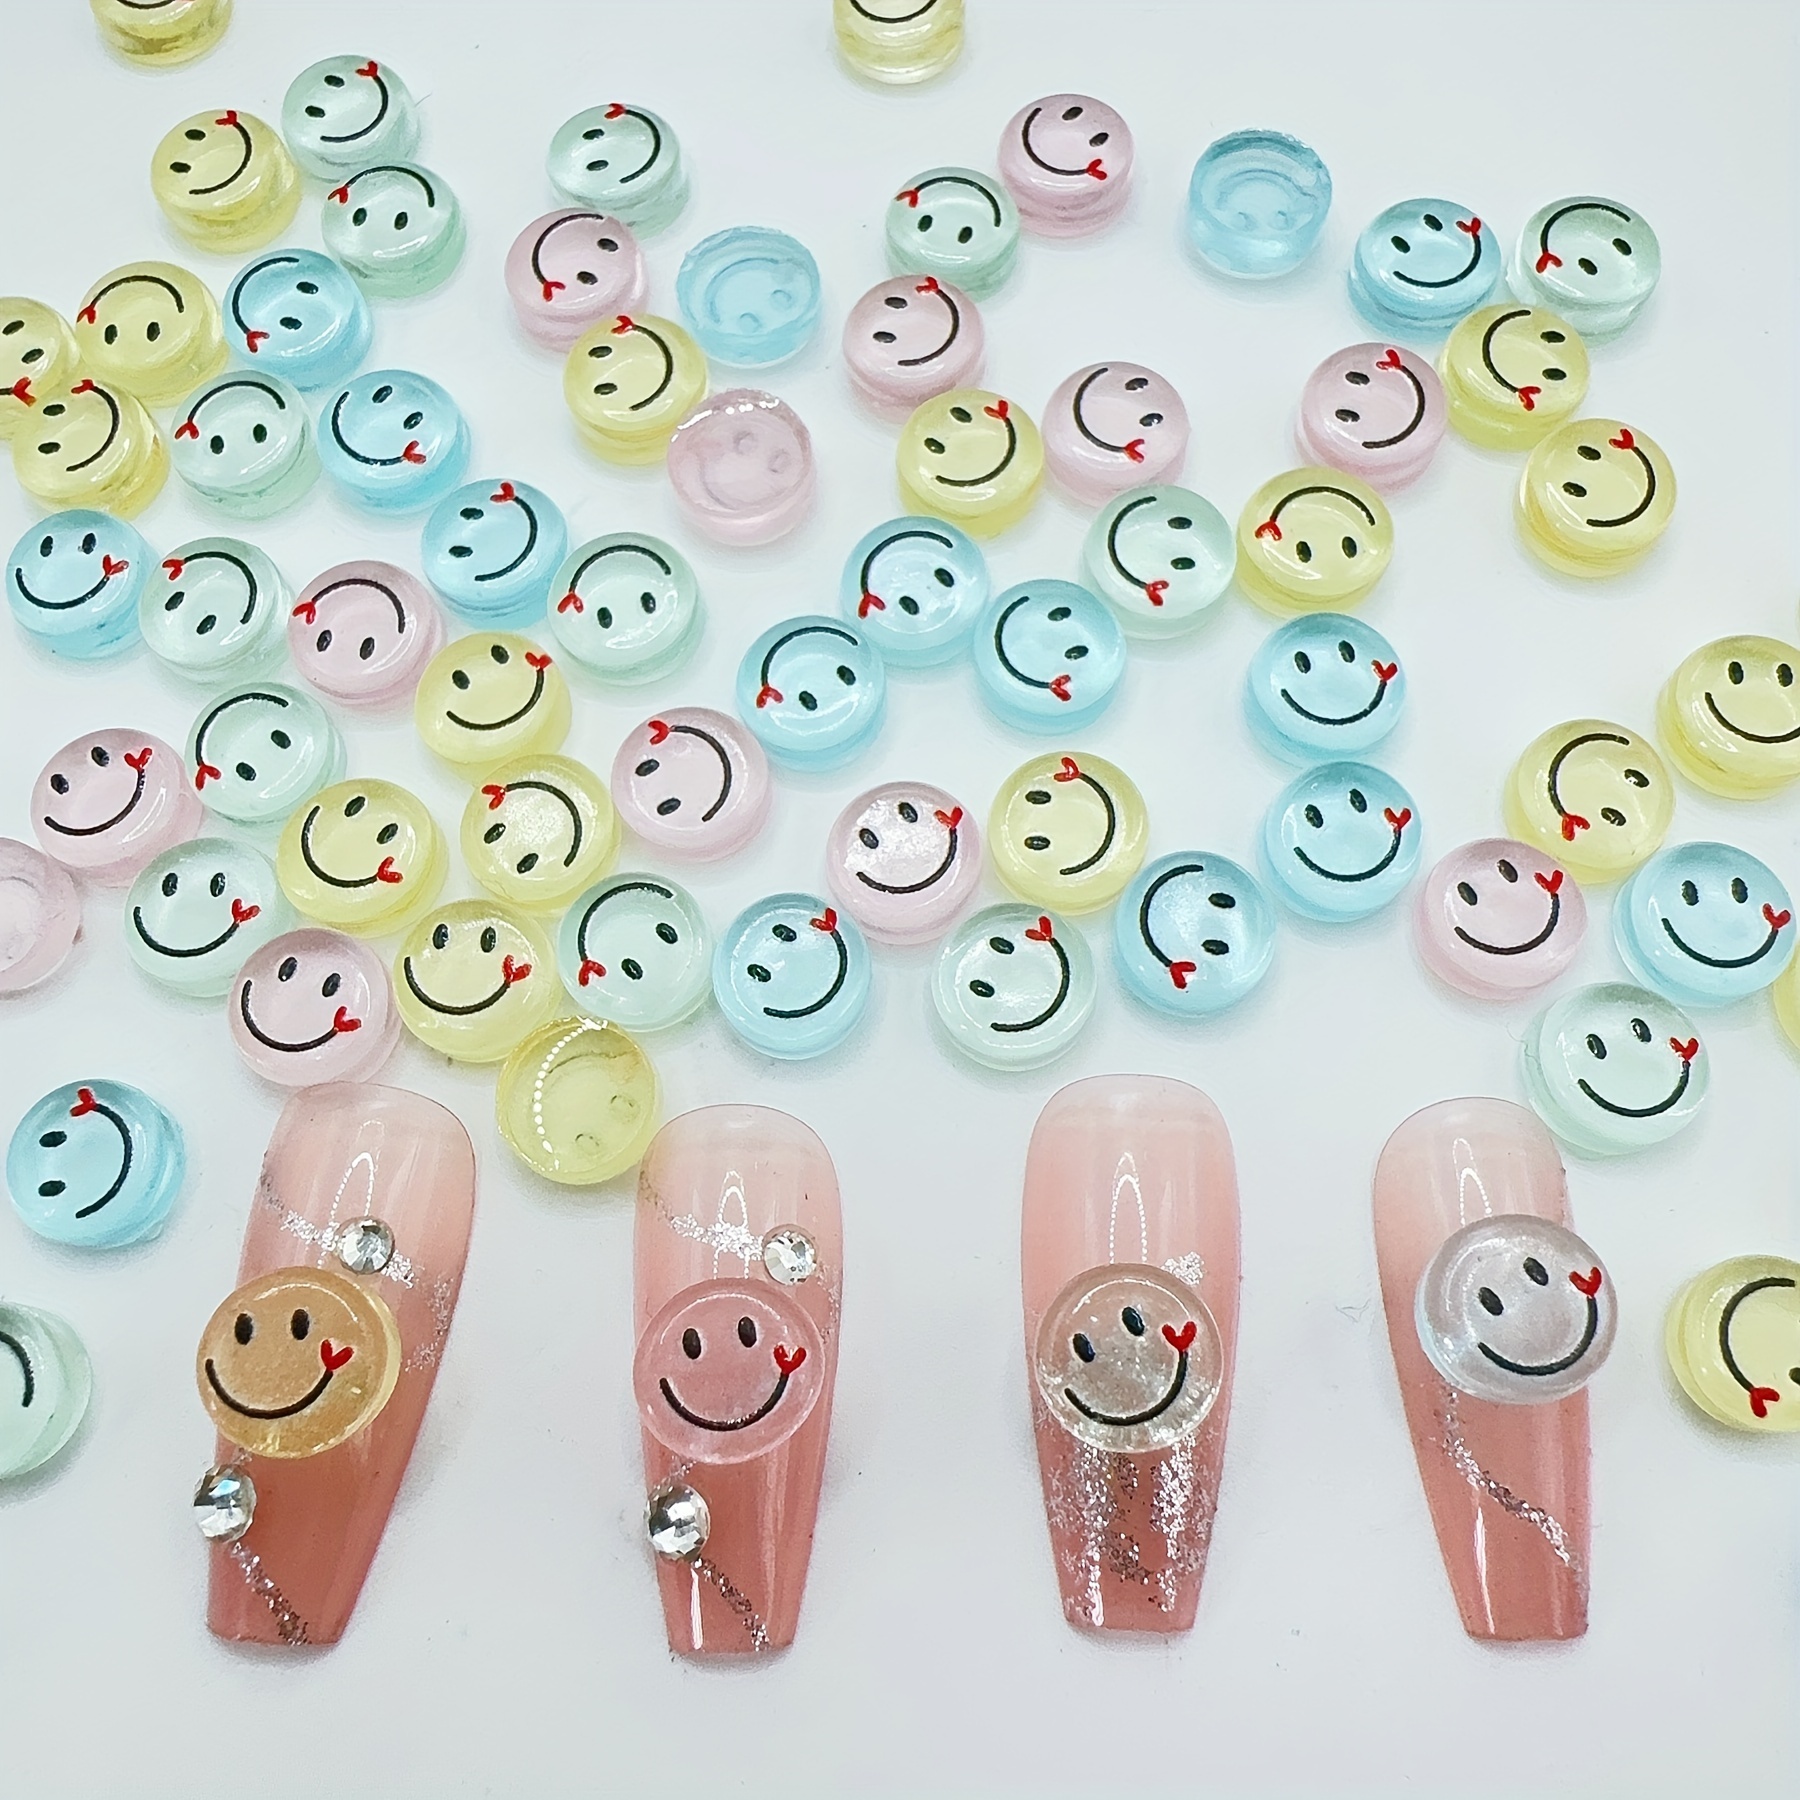 

50pcs 8mm Diy Resin Cute Mini Cartoon Cute Round Heart Smiling Face Flat Back Cabochon, Scrapbook Woman Girls Nail Slices Manicure Charms Decorate Jewelry Accessories